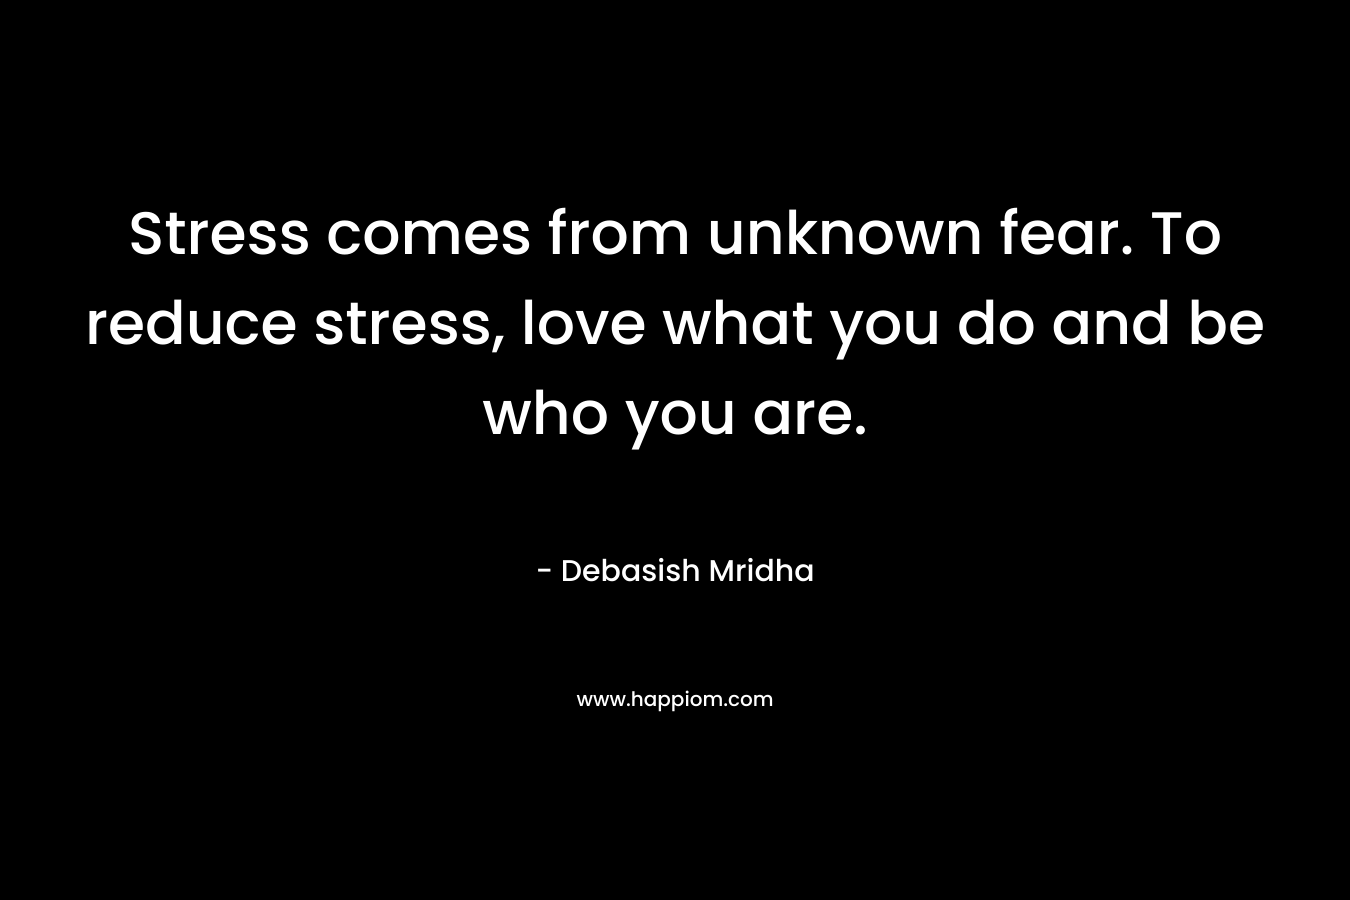 Stress comes from unknown fear. To reduce stress, love what you do and be who you are.